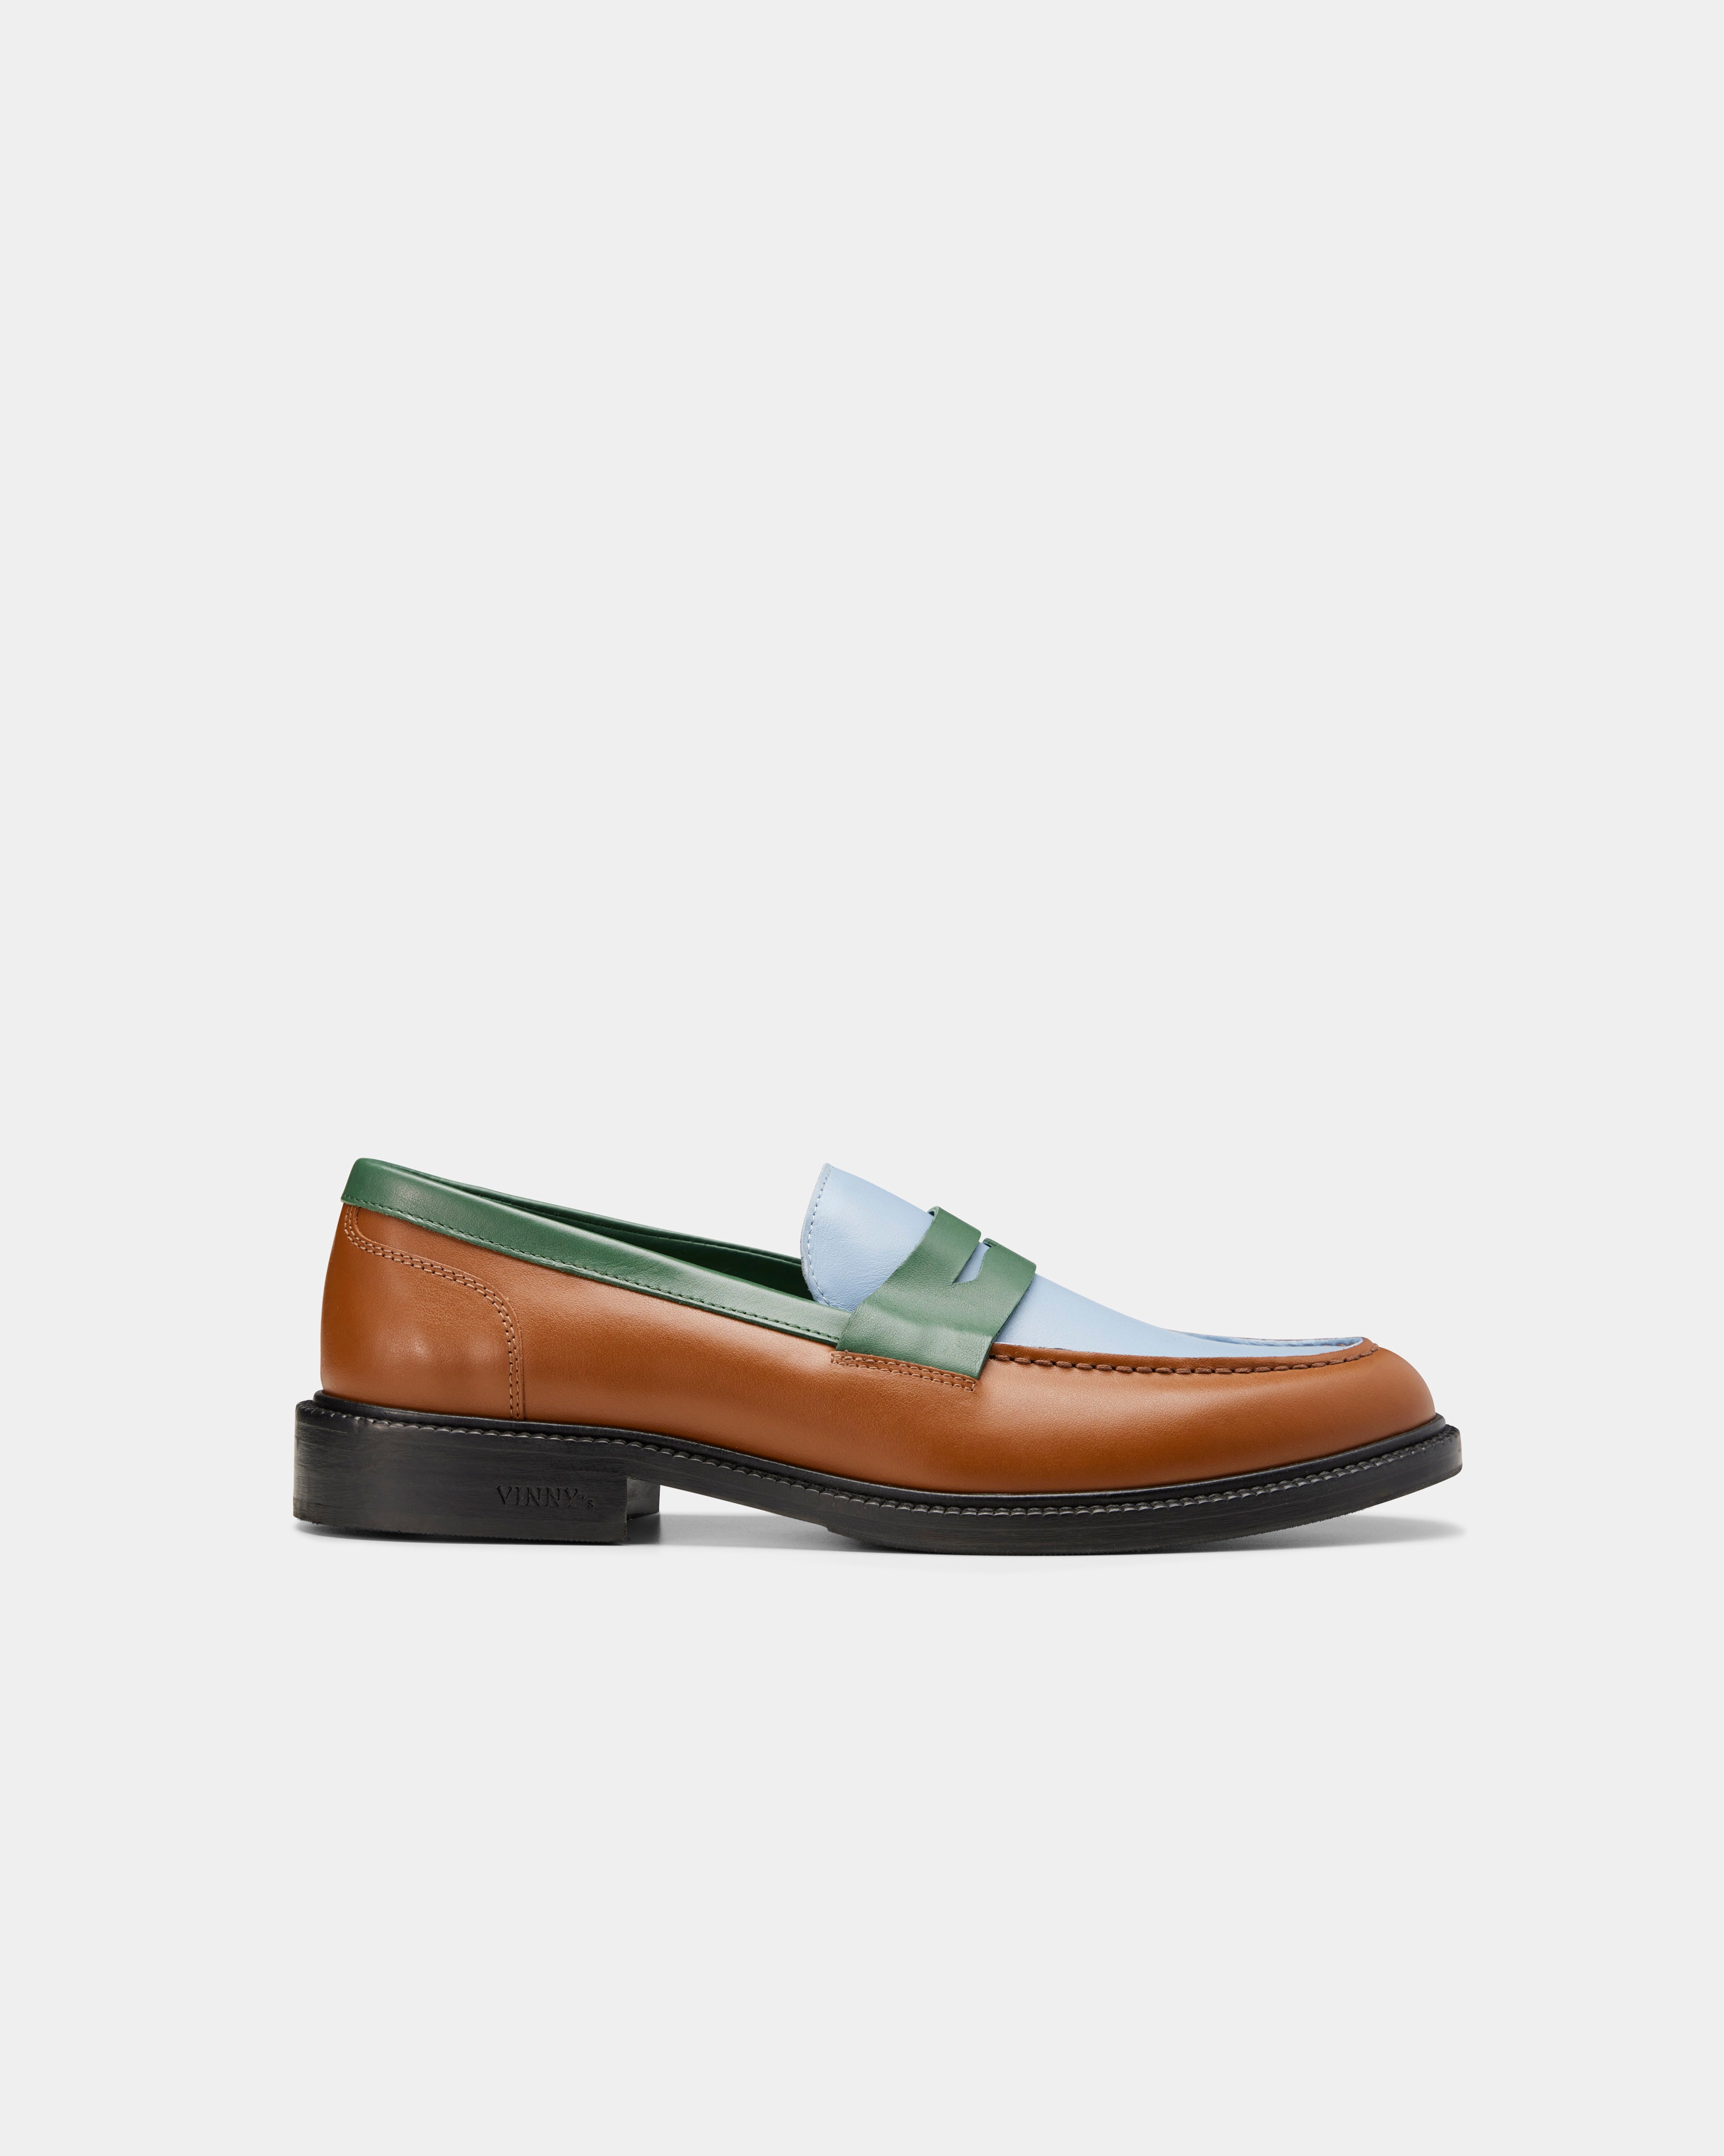 Women's Townee tri-tone loafer